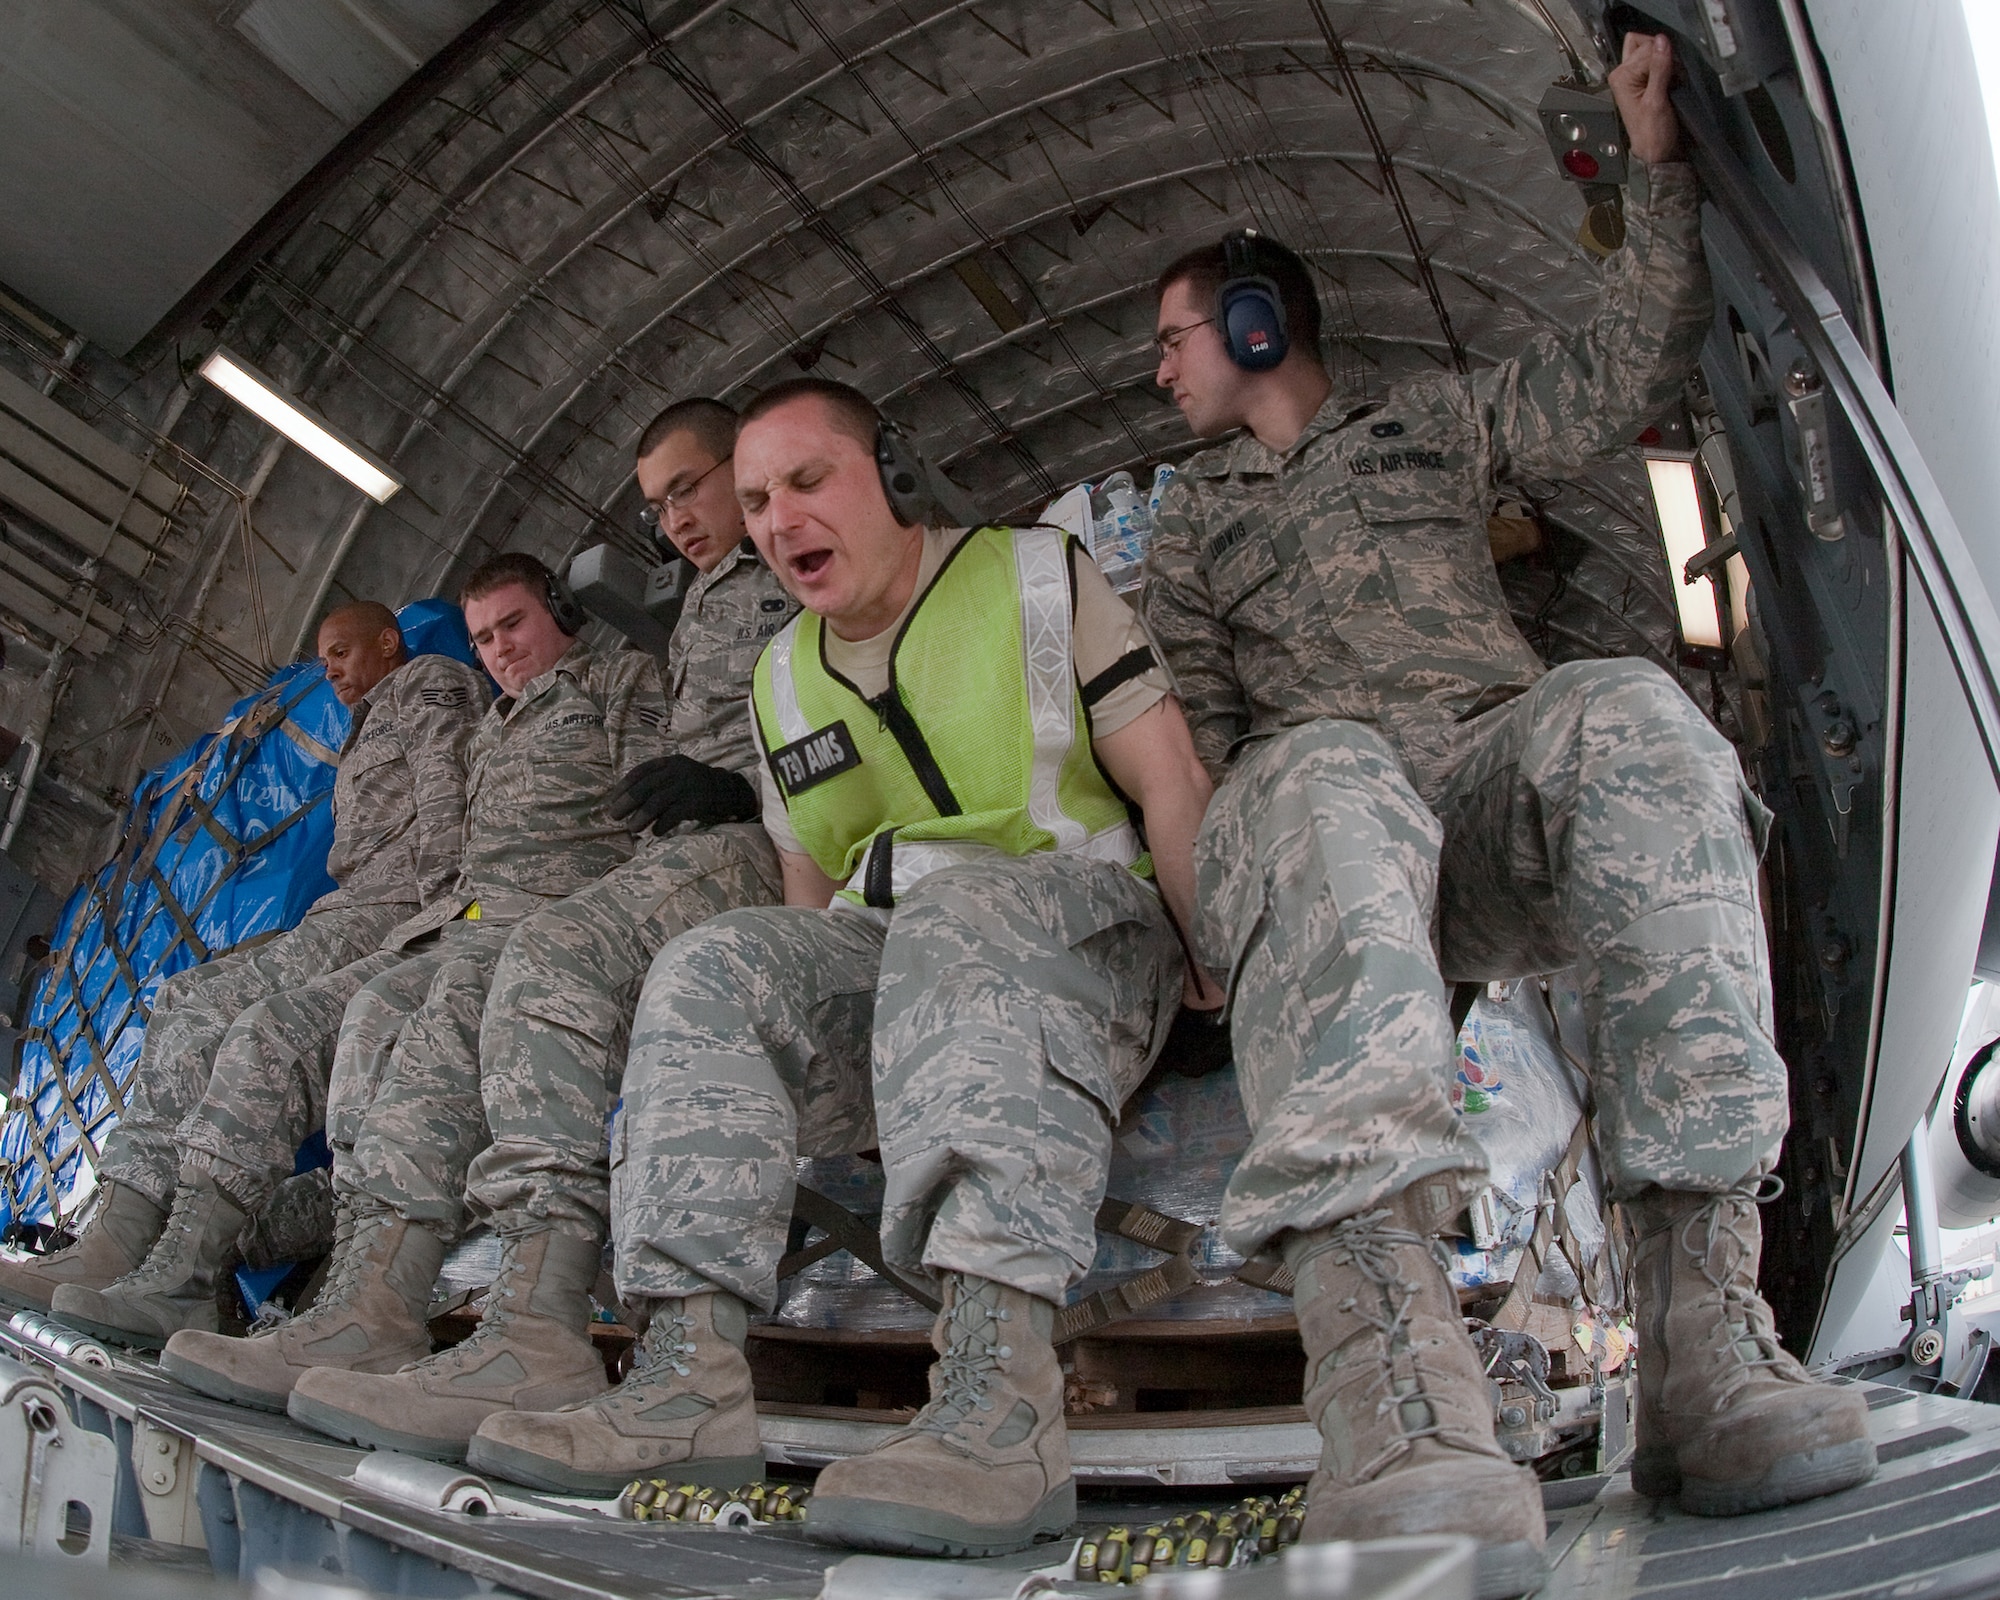 YOKOTA AIR BASE, Japan -- 730th Air Mobility Squadron members load ten pallets of food, water and blankets onto a C-17 Globalmaster III here March 20. This was the first C-17 carrying humanitarian relief supplies to land at Sendai Airport. (U.S. Air Force photo/Osakabe Yasuo)